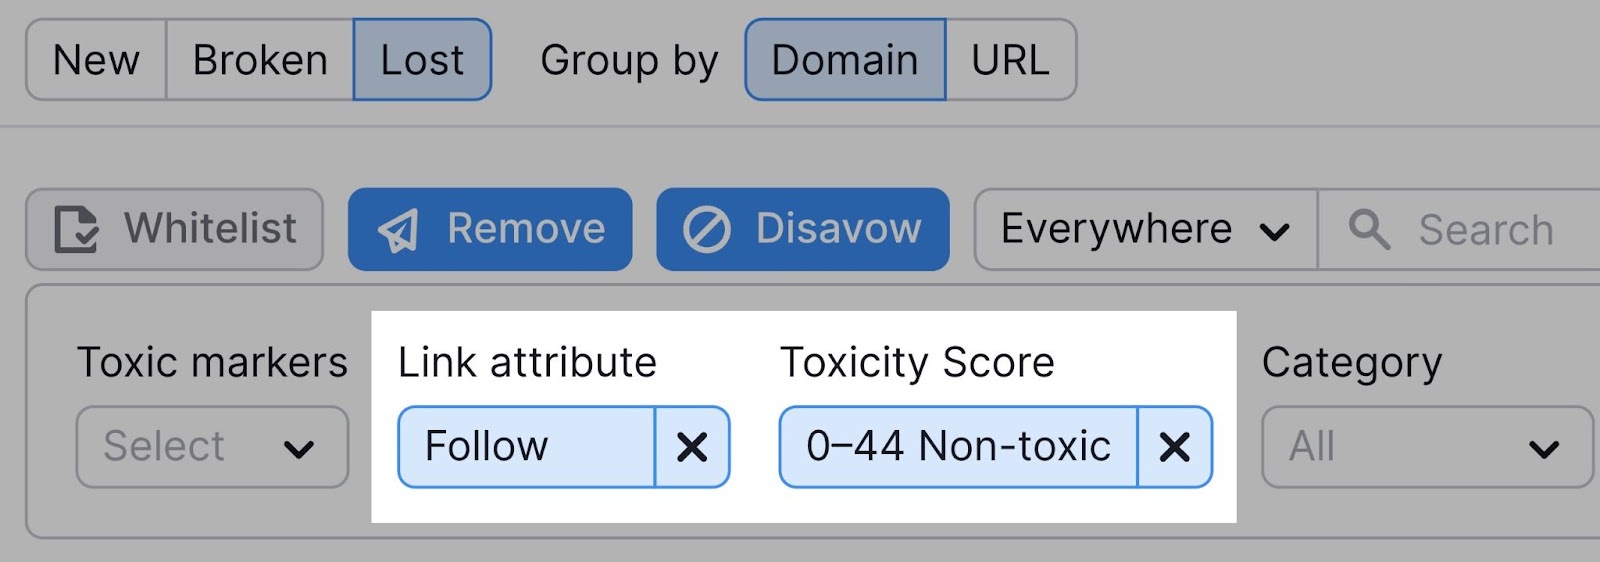 filtering the list to show follow links with low toxicity scores